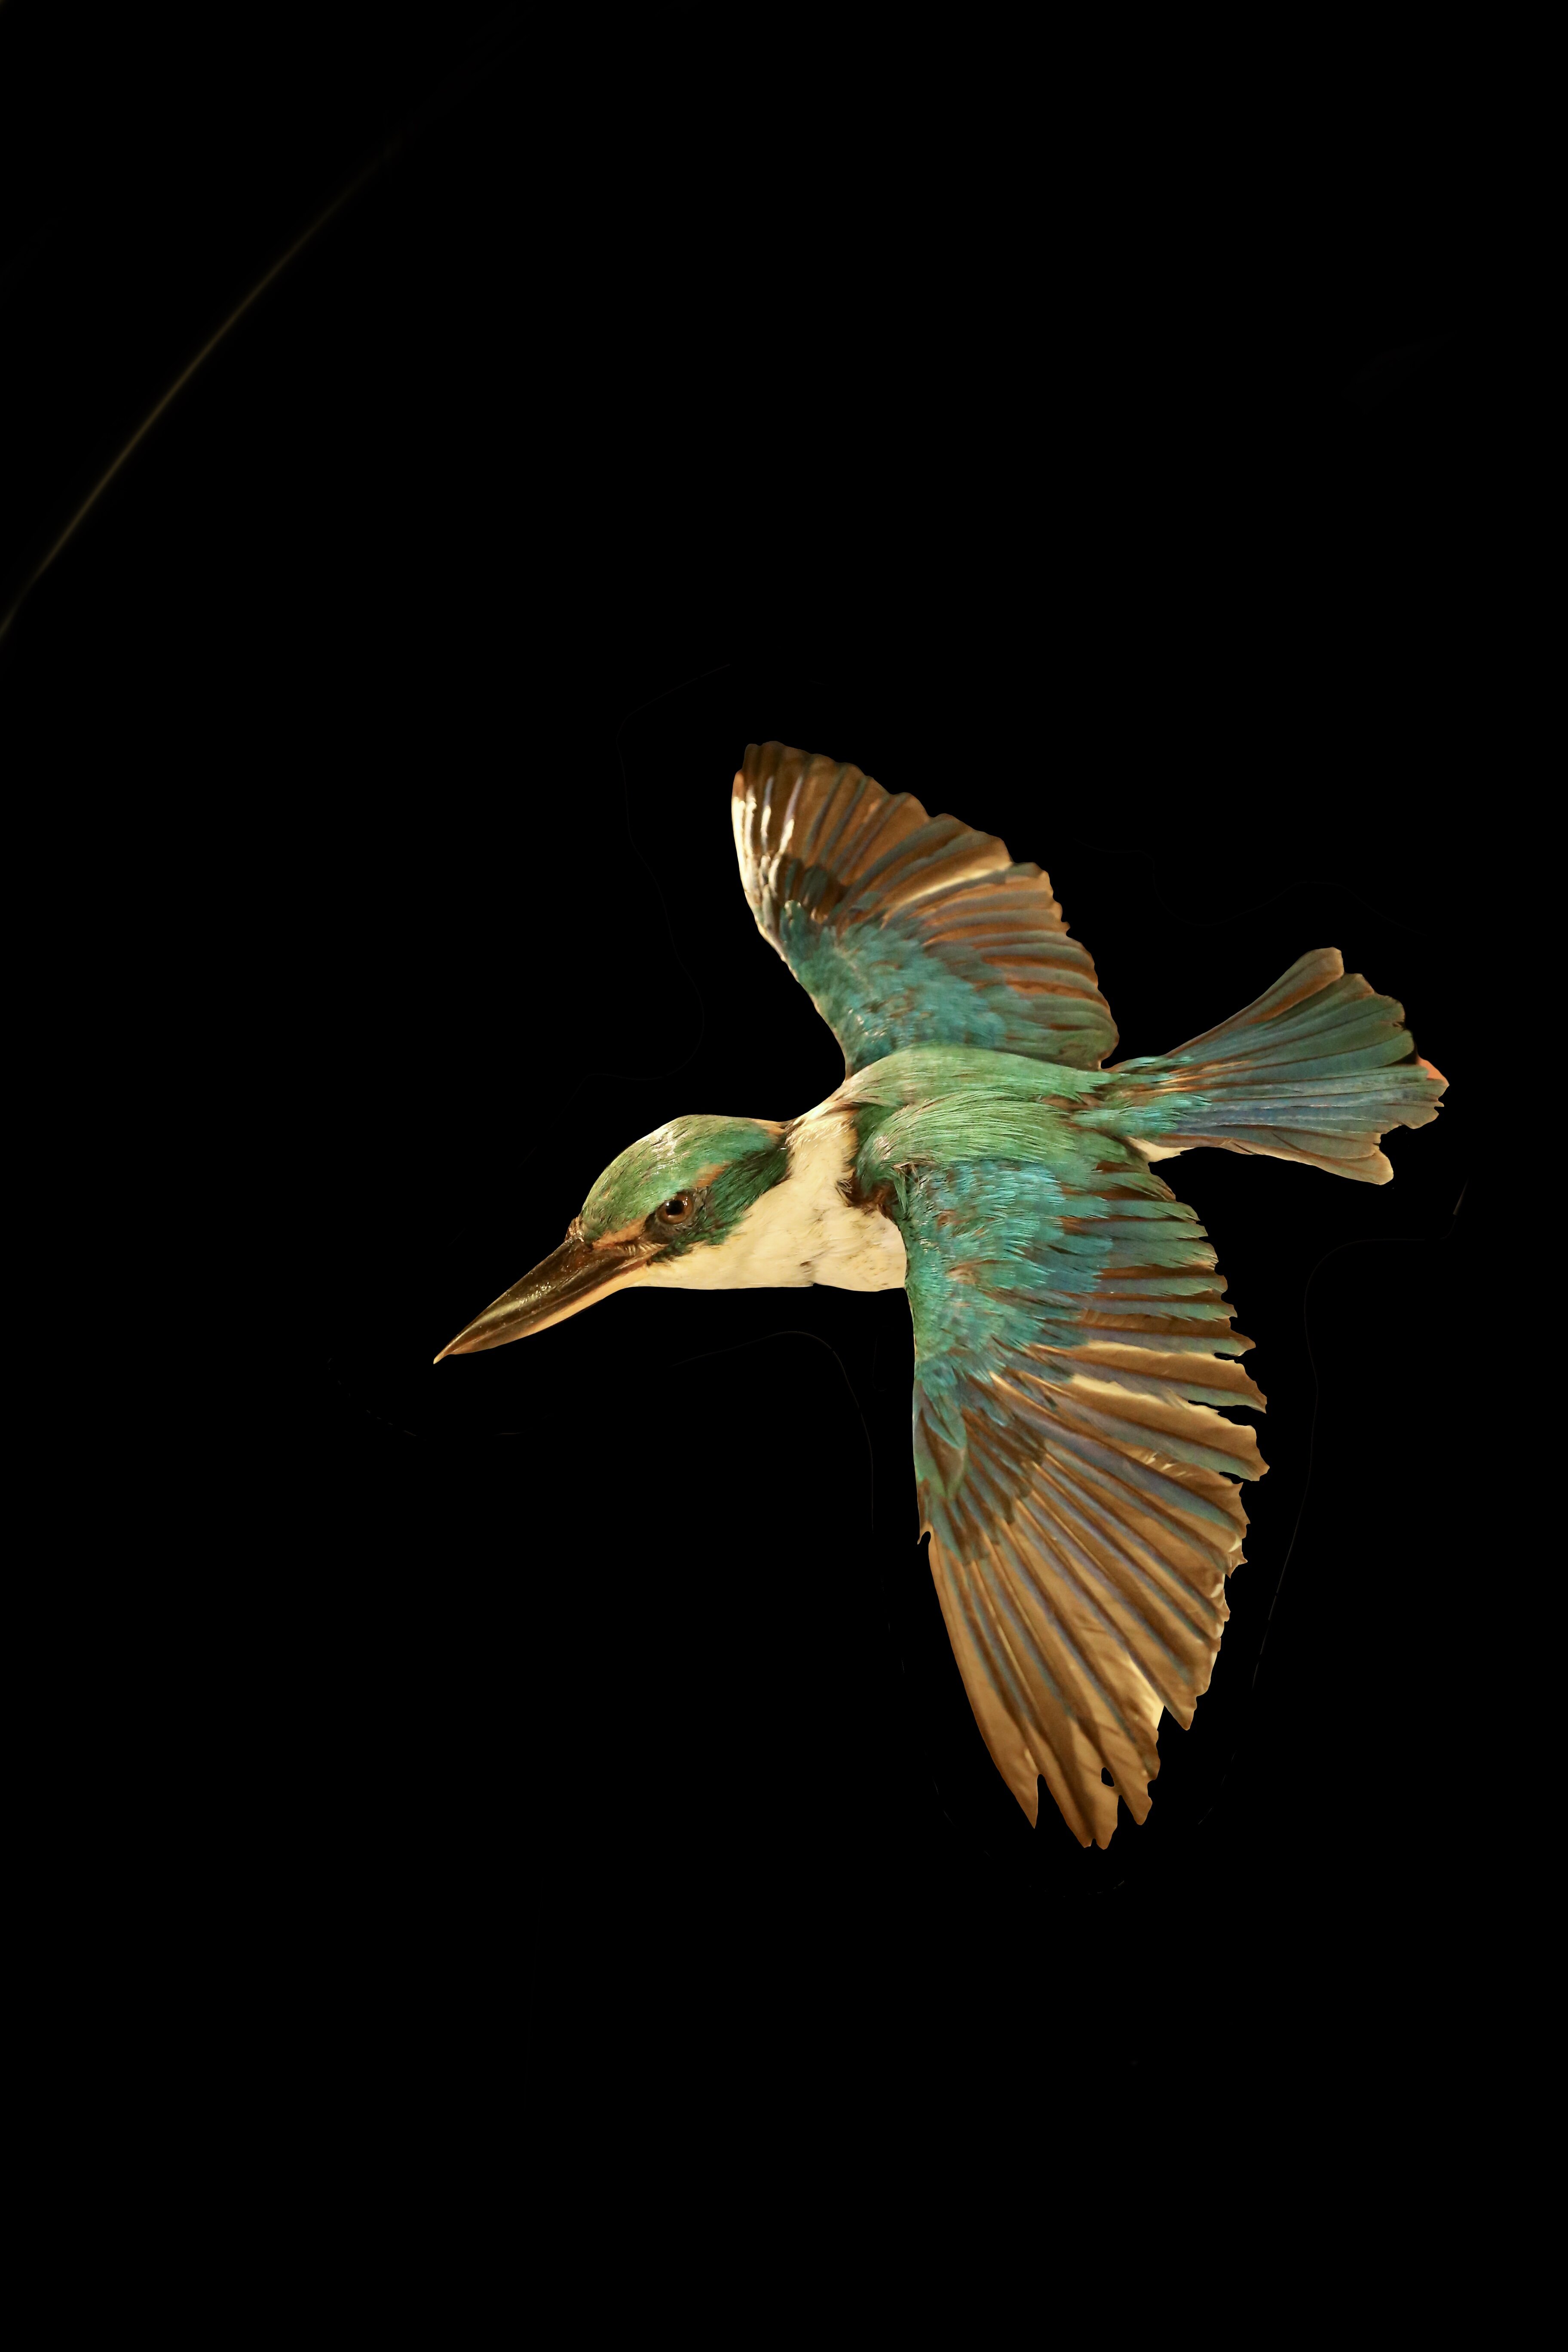 A kingfisher that has been restored by the Museum's conservator